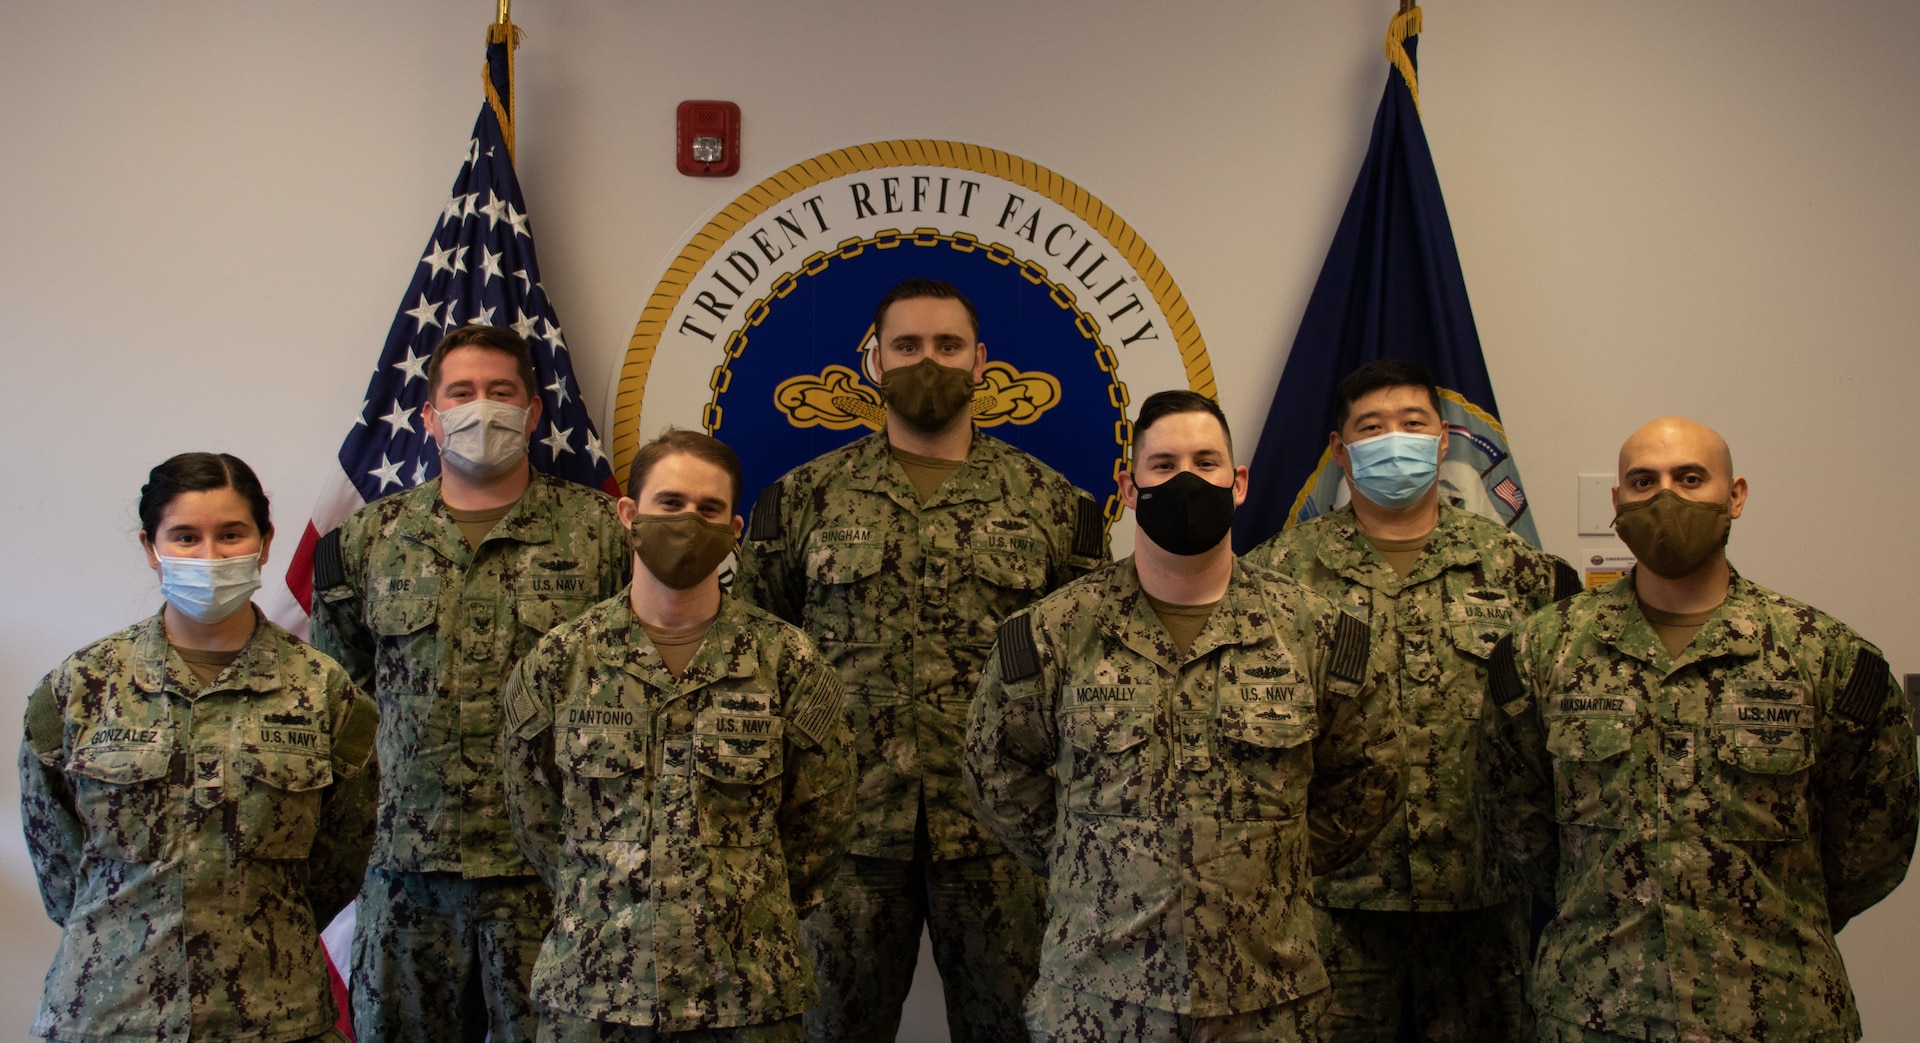 SILVERDALE, Wash. (Feb. 23, 2021) – Trident Refit Facility Bangor (TRFB) Career Counselors (from left to right) Gas Turbine Systems Technician (Mechanical) 2nd Class Keslie Gonzalez, Yeoman (Submarines) 2nd Class Ethan Noe, Gas Turbine Systems Technician (Mechanical) 2nd Class Thomas D’Antonio, Machinist Mate (Auxiliary) 2nd Class Matthew Bingham, Sonar Technician (Submarines) 2nd Class Christopher Mcanally, Command Career Counselor (CCC) Machinist Mate (Auxiliary) 2nd Class Leo Zhang, and Hull Maintenance Technician 1st Class Audon Ariasmartinez represent TRFB’s Command Career Management Program, which is made up of 27 career counselors. TRFB recently received the Naval Sea Systems Command (NAVSEA) Retention Excellence Award for the fiscal year 2020 for superior accomplishment in executing programs that best enable Sailors to succeed in the Navy and for directly supporting the concept of Brilliant on the Basics, a charge from the U.S. Navy to reinvigorate efforts to foster an environment where Sailors and their families want to stay in the Navy.  (U.S. Navy photo by Mass Communication Specialist Chief Rebecca Ives/released)